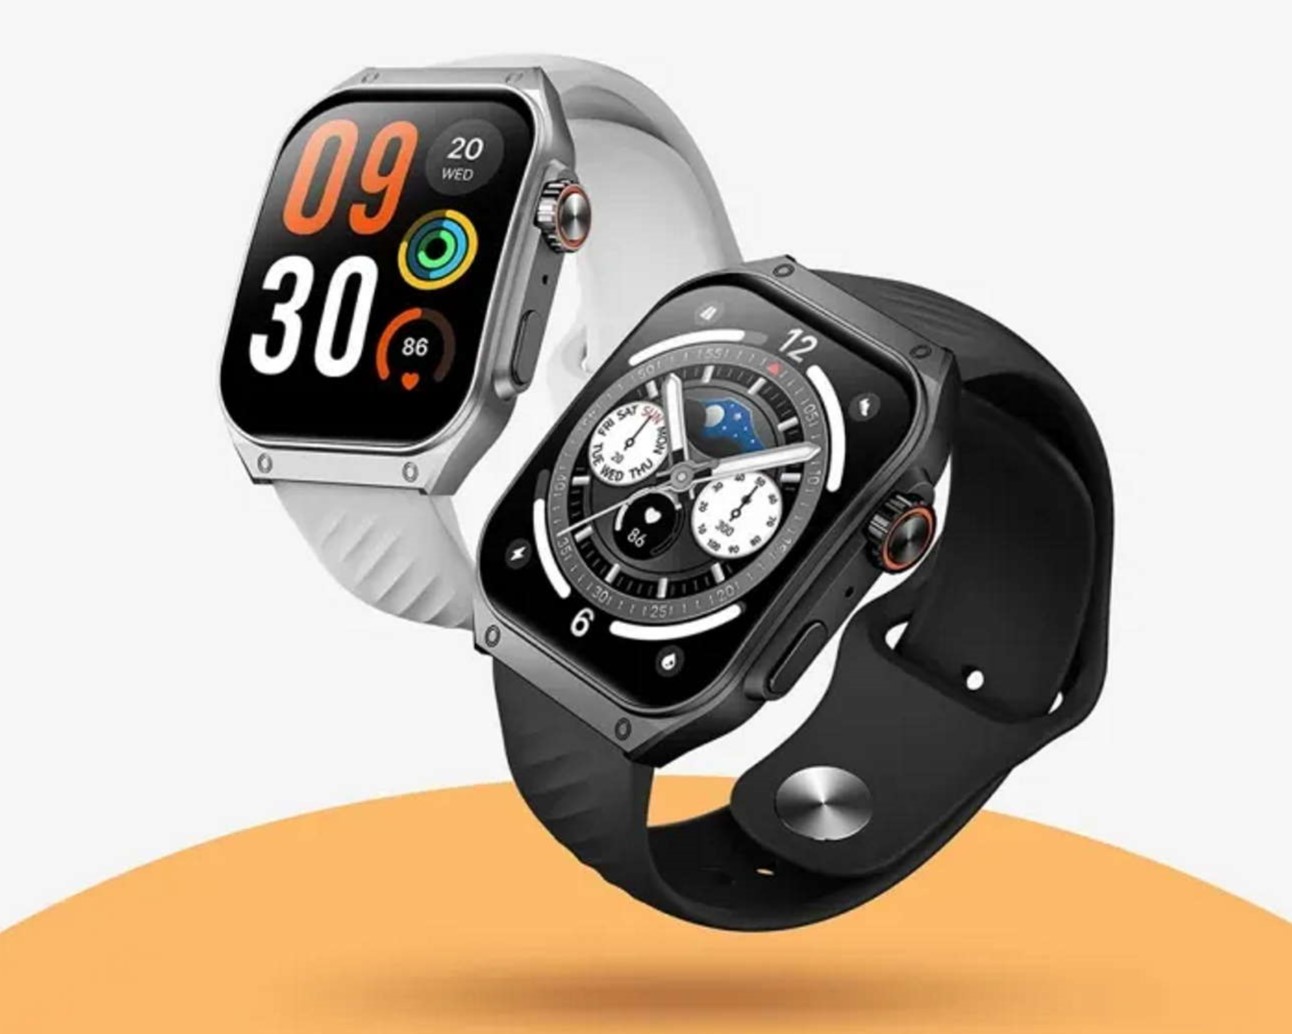 Haylou S8: New smartwatch with AMOLED and telephony functions also